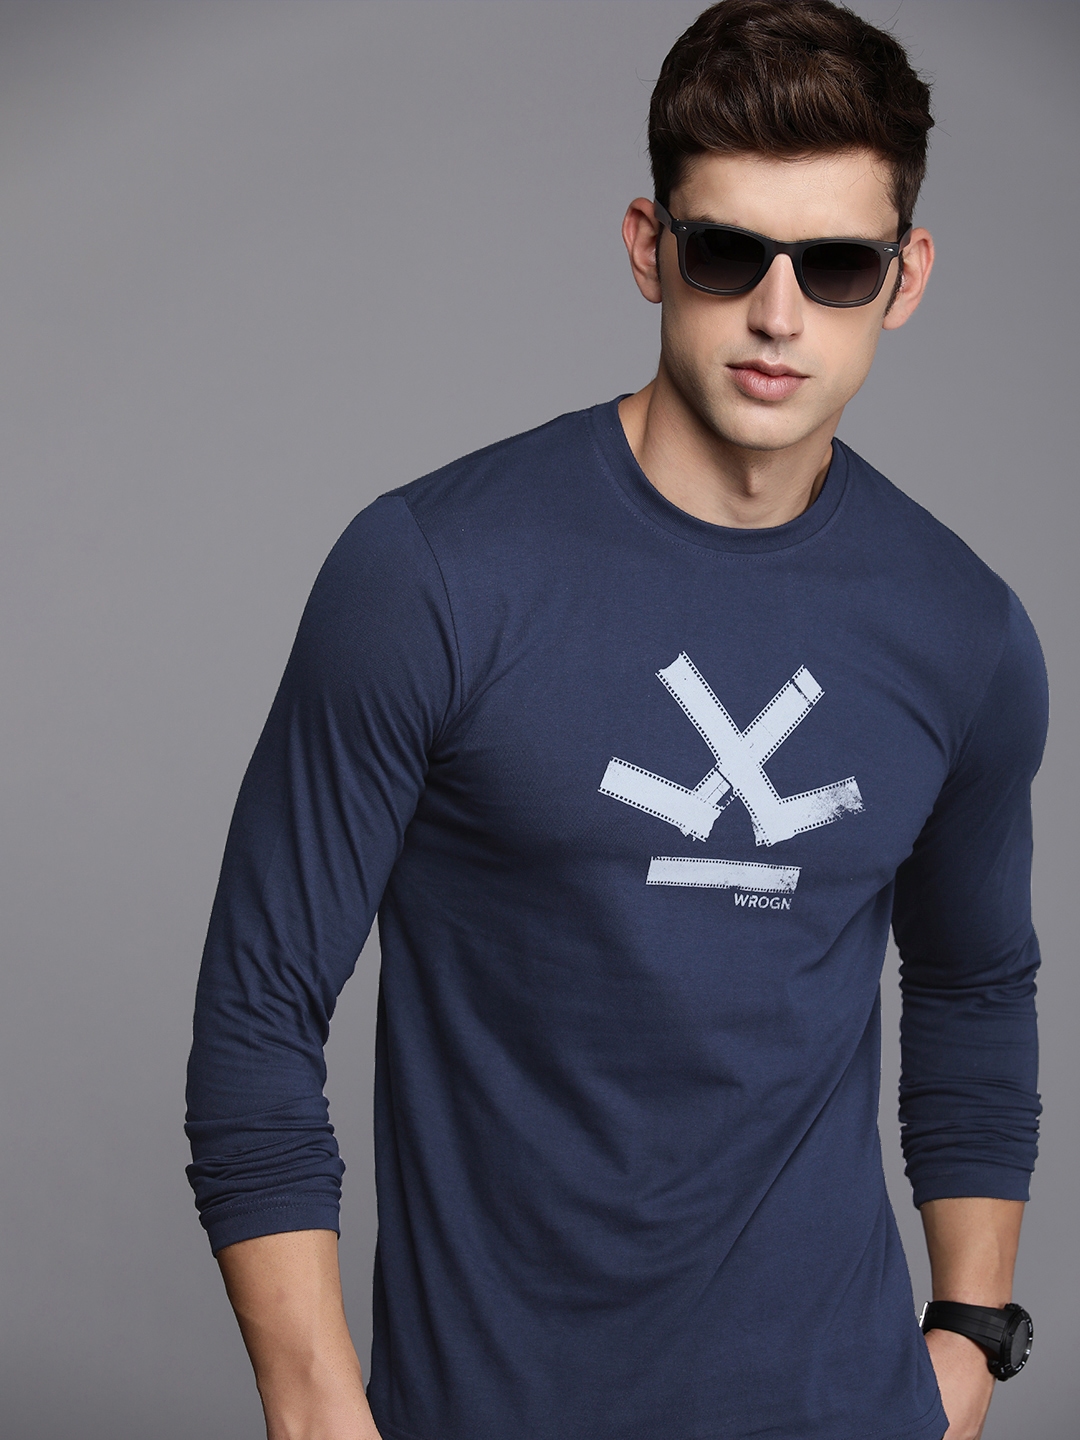 Buy WROGN Round Neck Printed T Shirt - Tshirts for Men 23770256 | Myntra